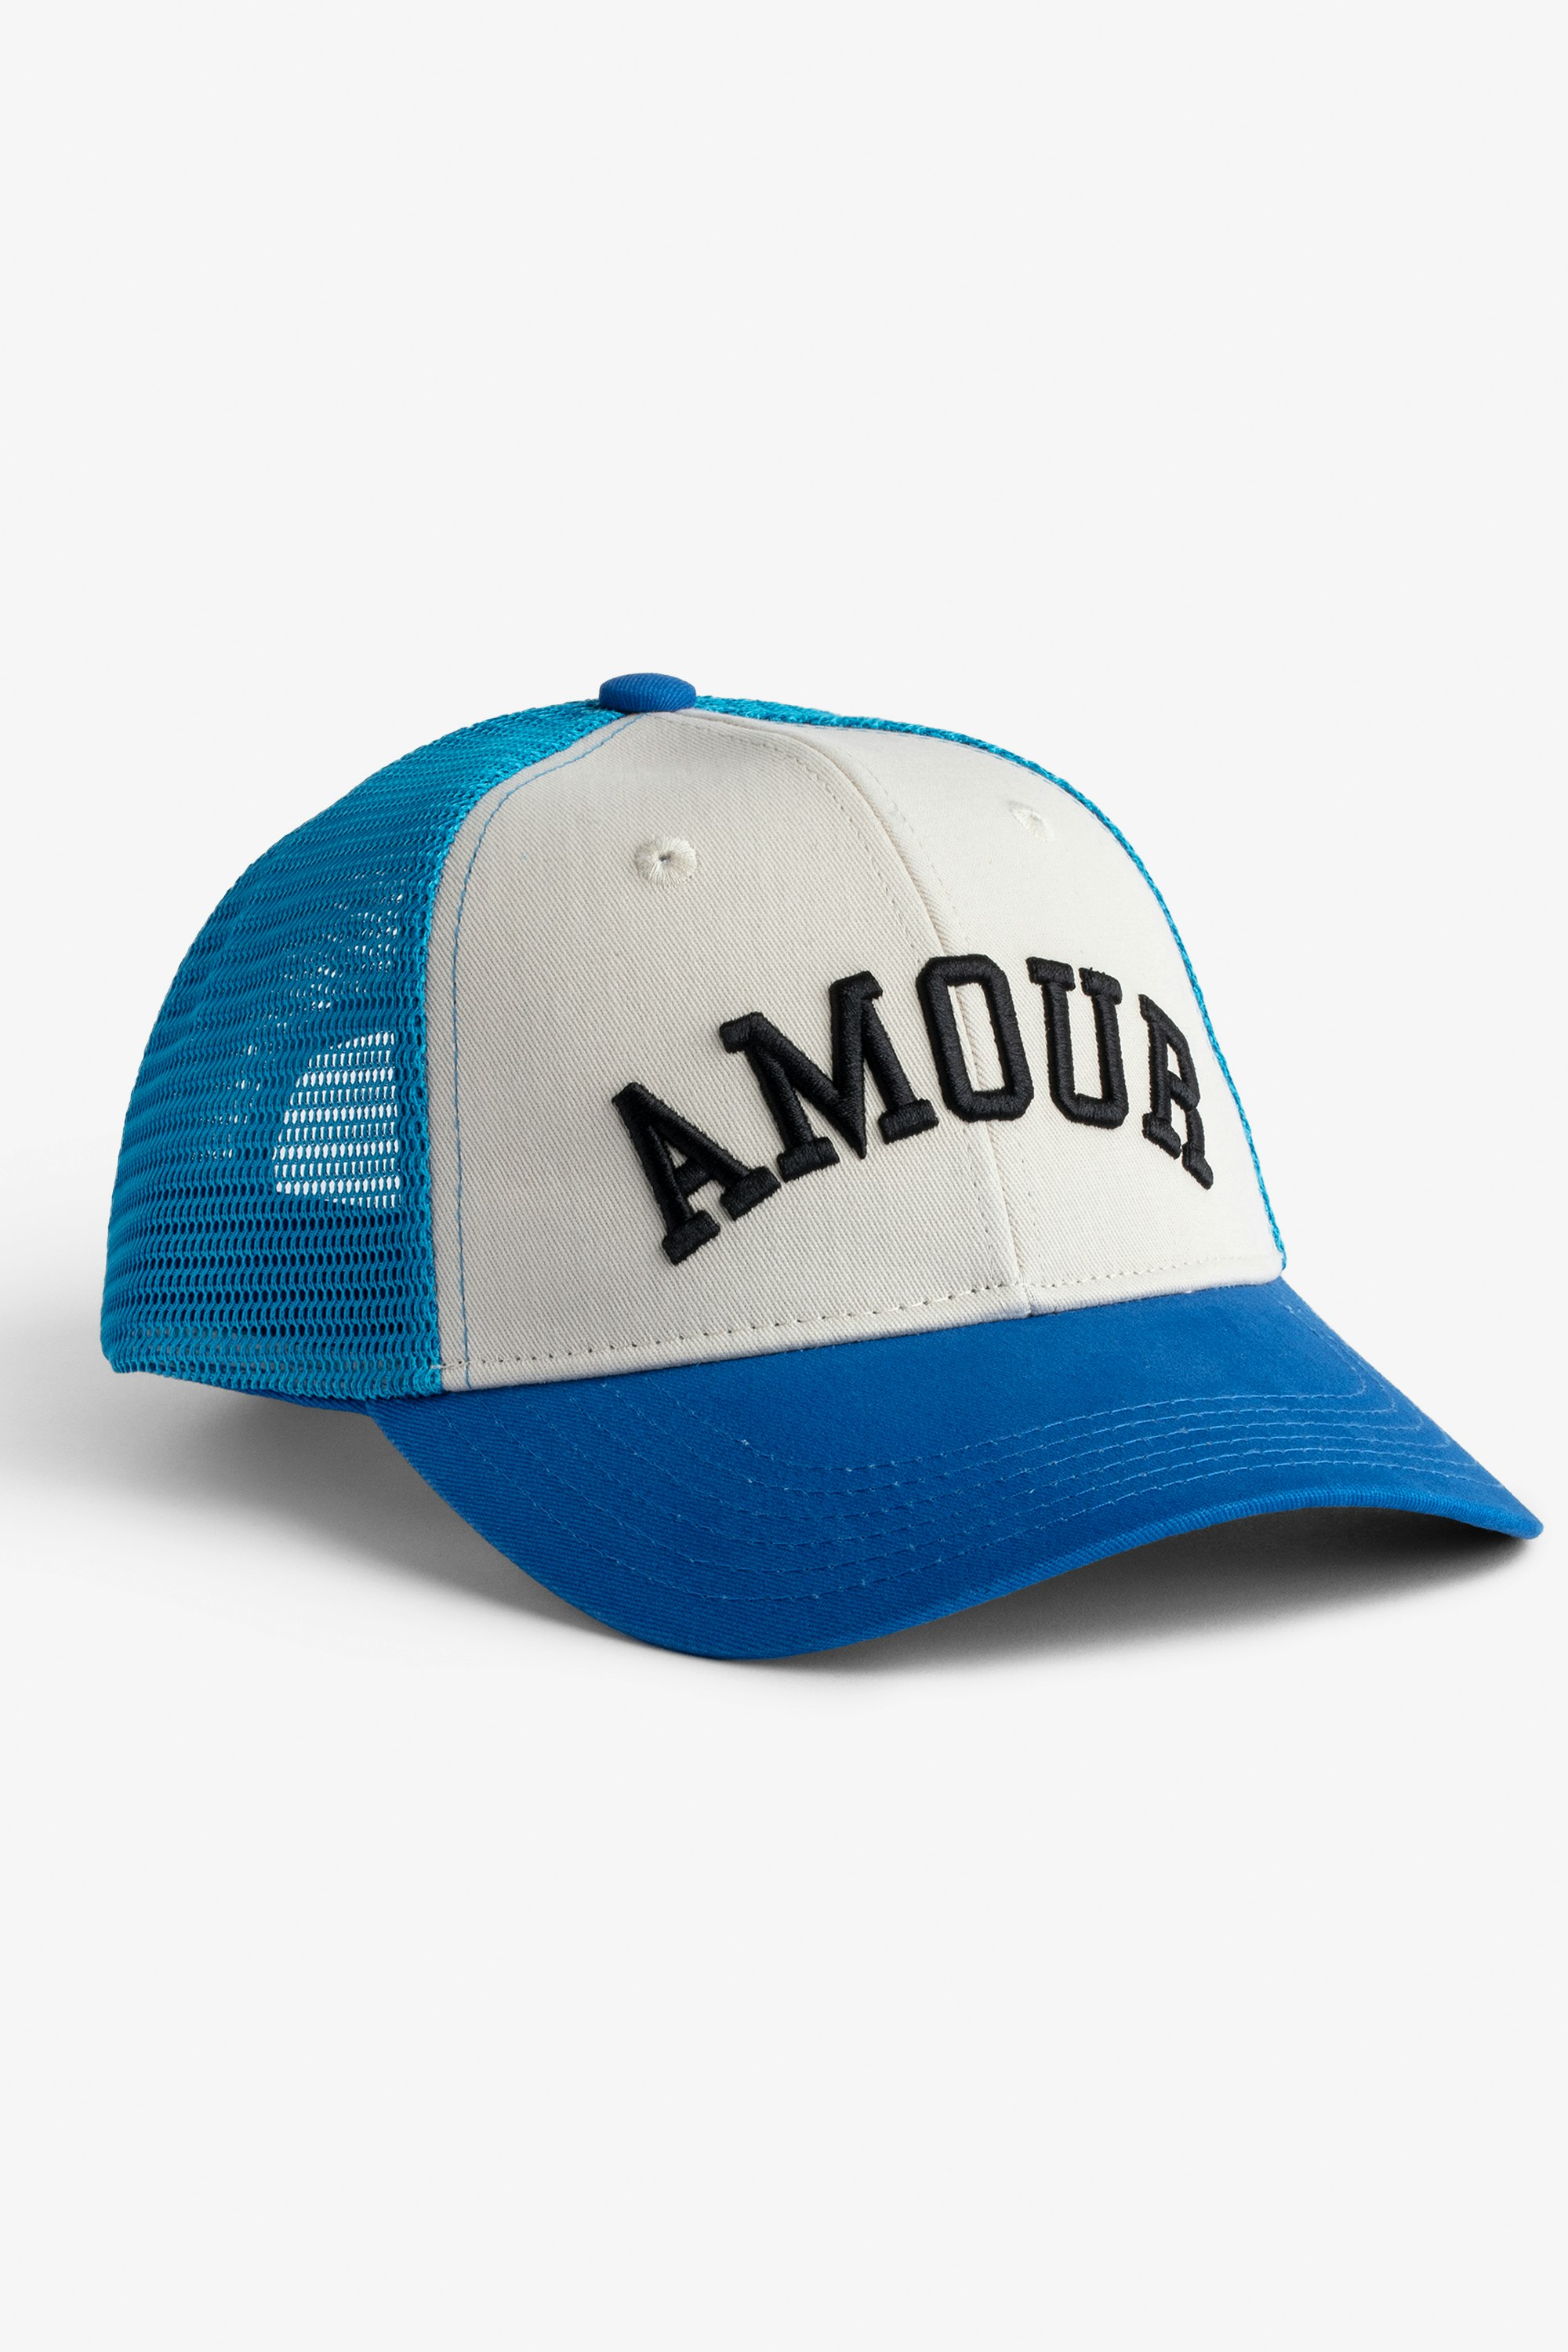 Klelia Amour Cap Women's Amour embroidered cap in blue cotton and mesh